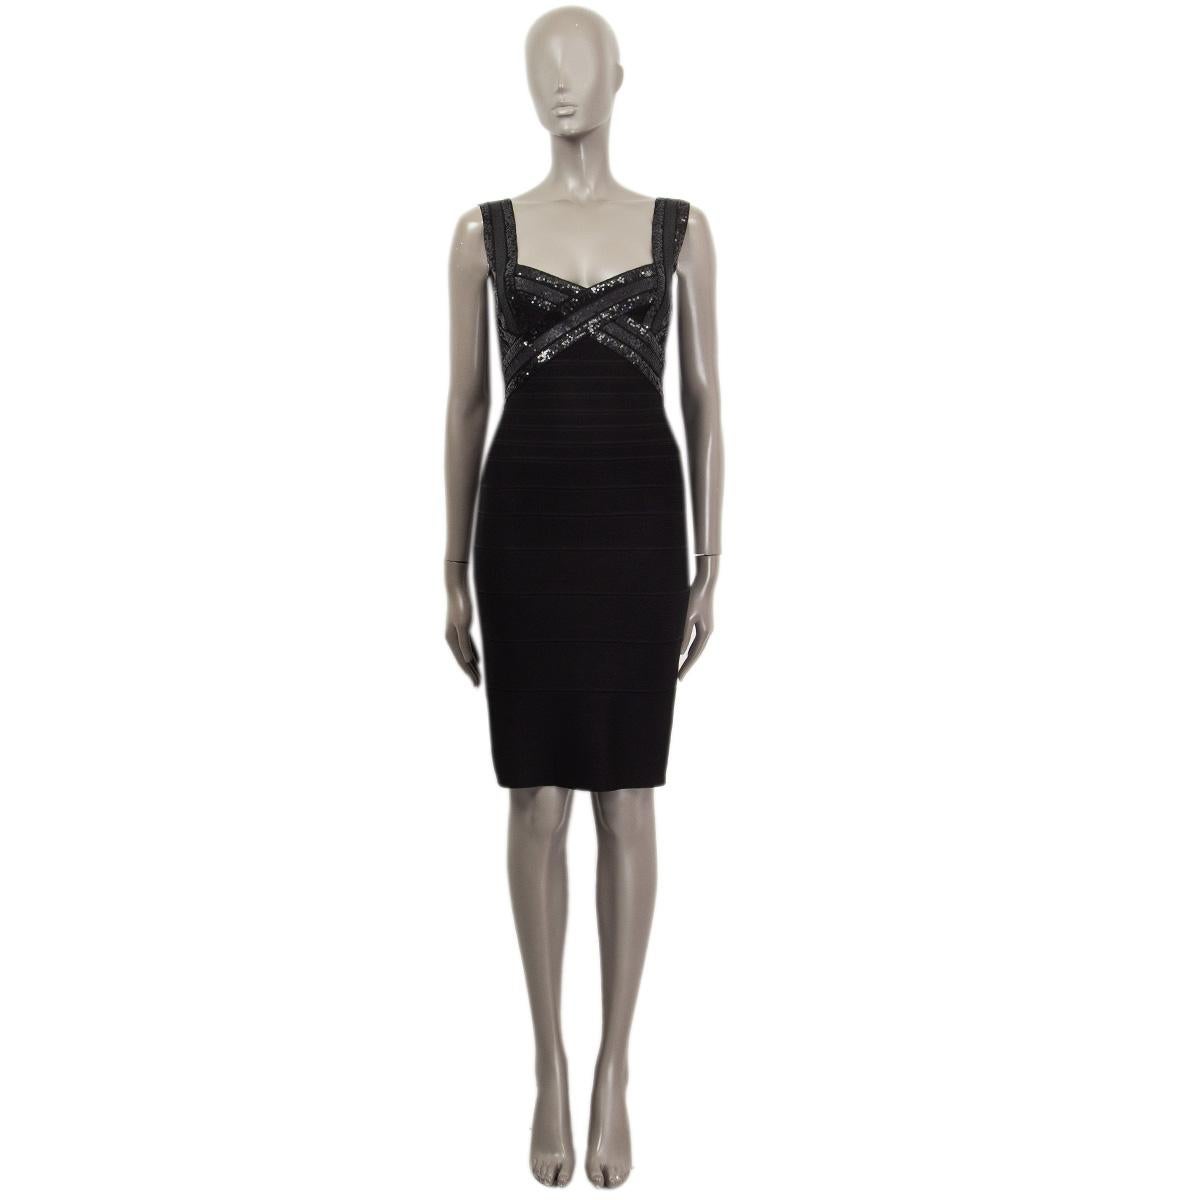 100% authentic Herve Leger sleeveless bandage dress in black rayon (90%), nylon (9%) and spandex (1%). Embellished with black sequins on the front and the back. Closes with one hook-and-eye closure and concealed zipper on the back. Unlined. Has been